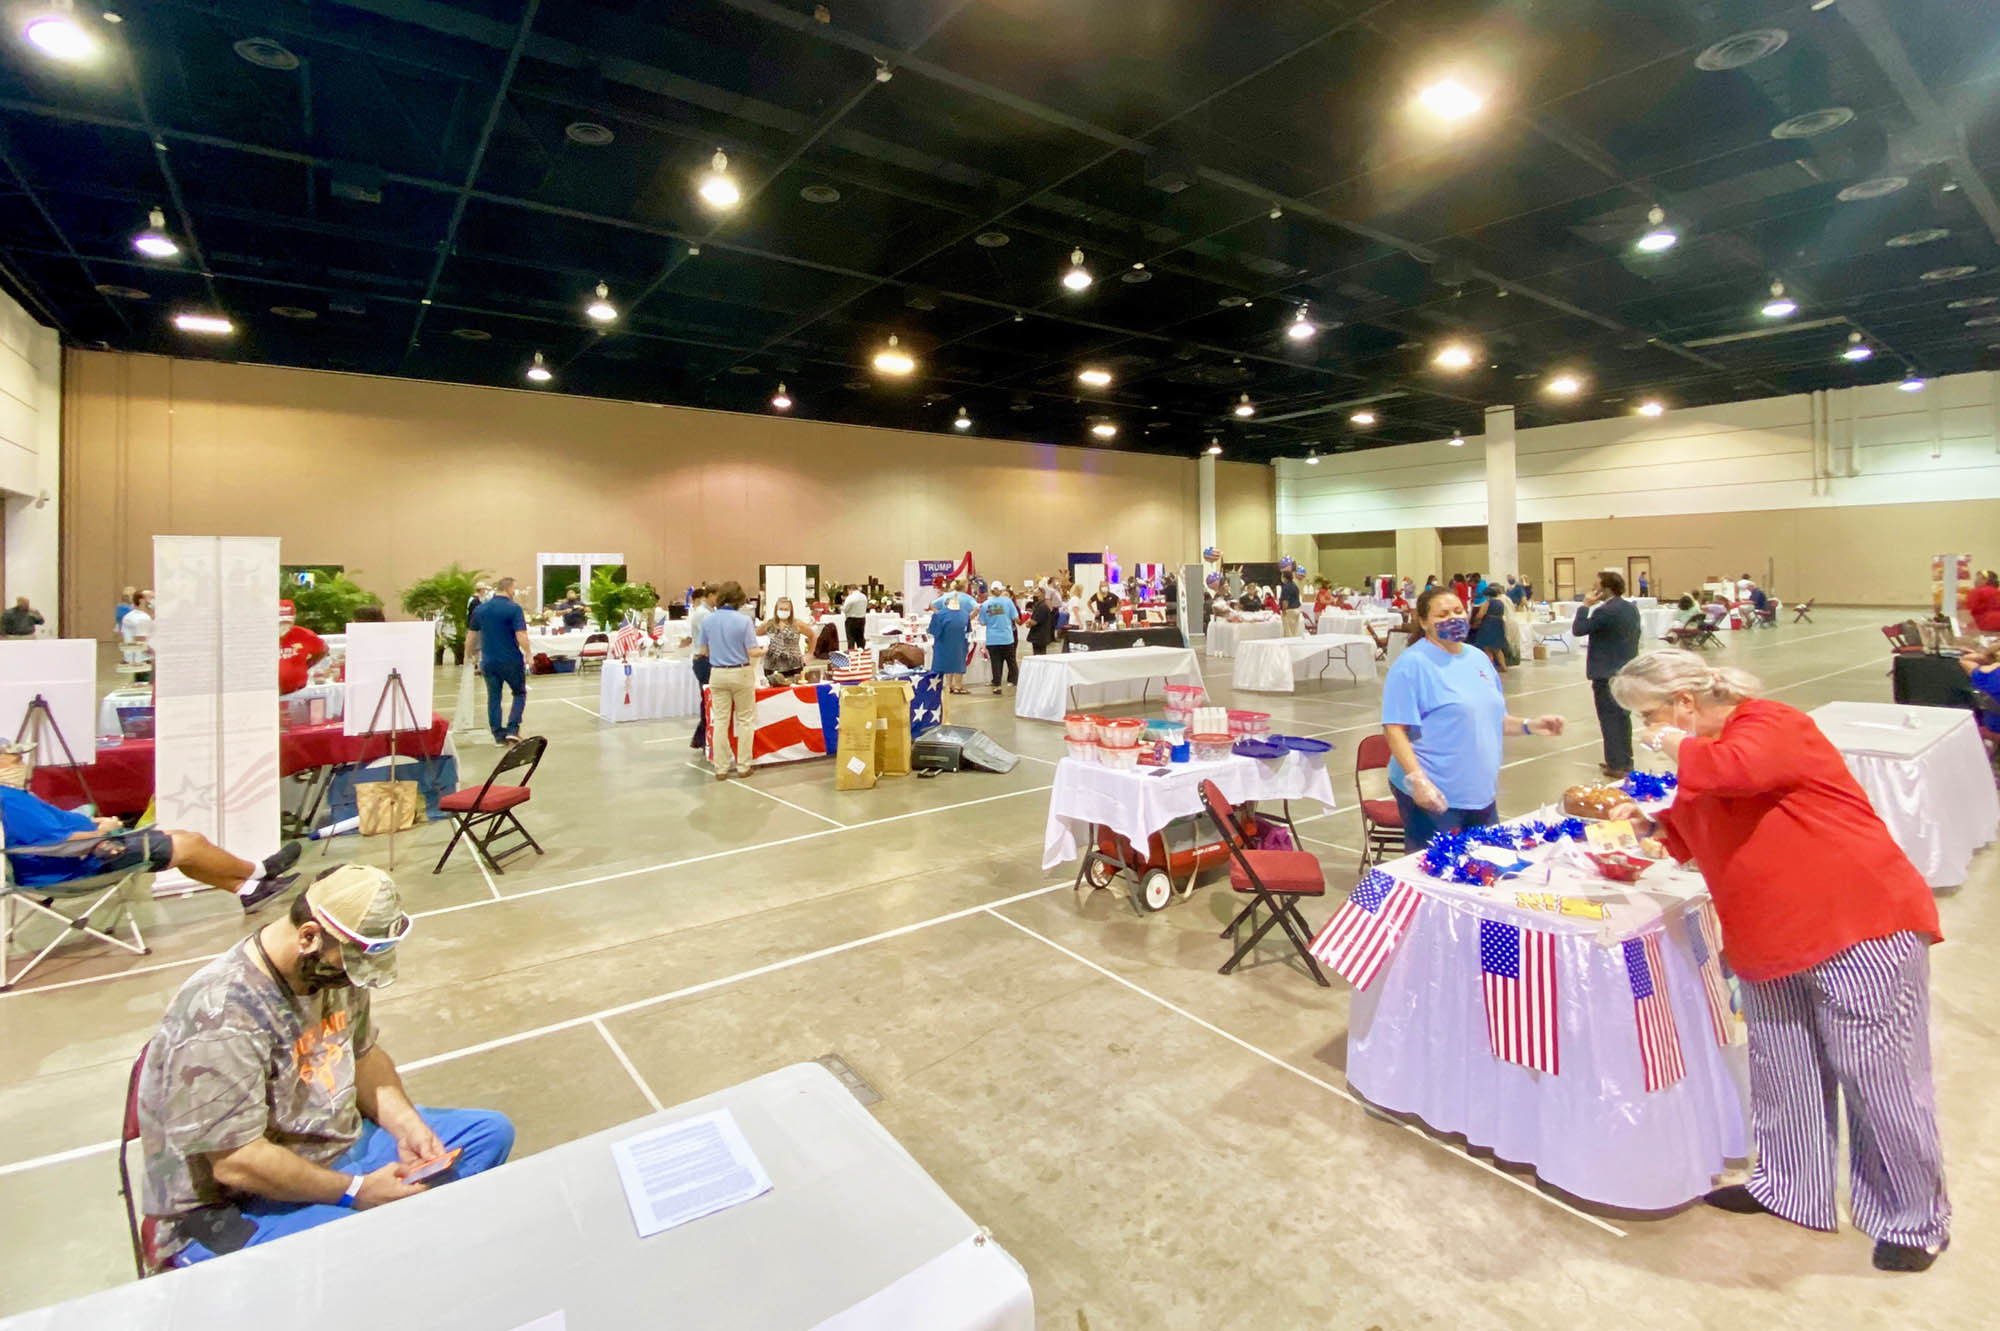 About 77 businesses attended the vendor showcase at the Prime F. Osborn III Convention Center on July 9.